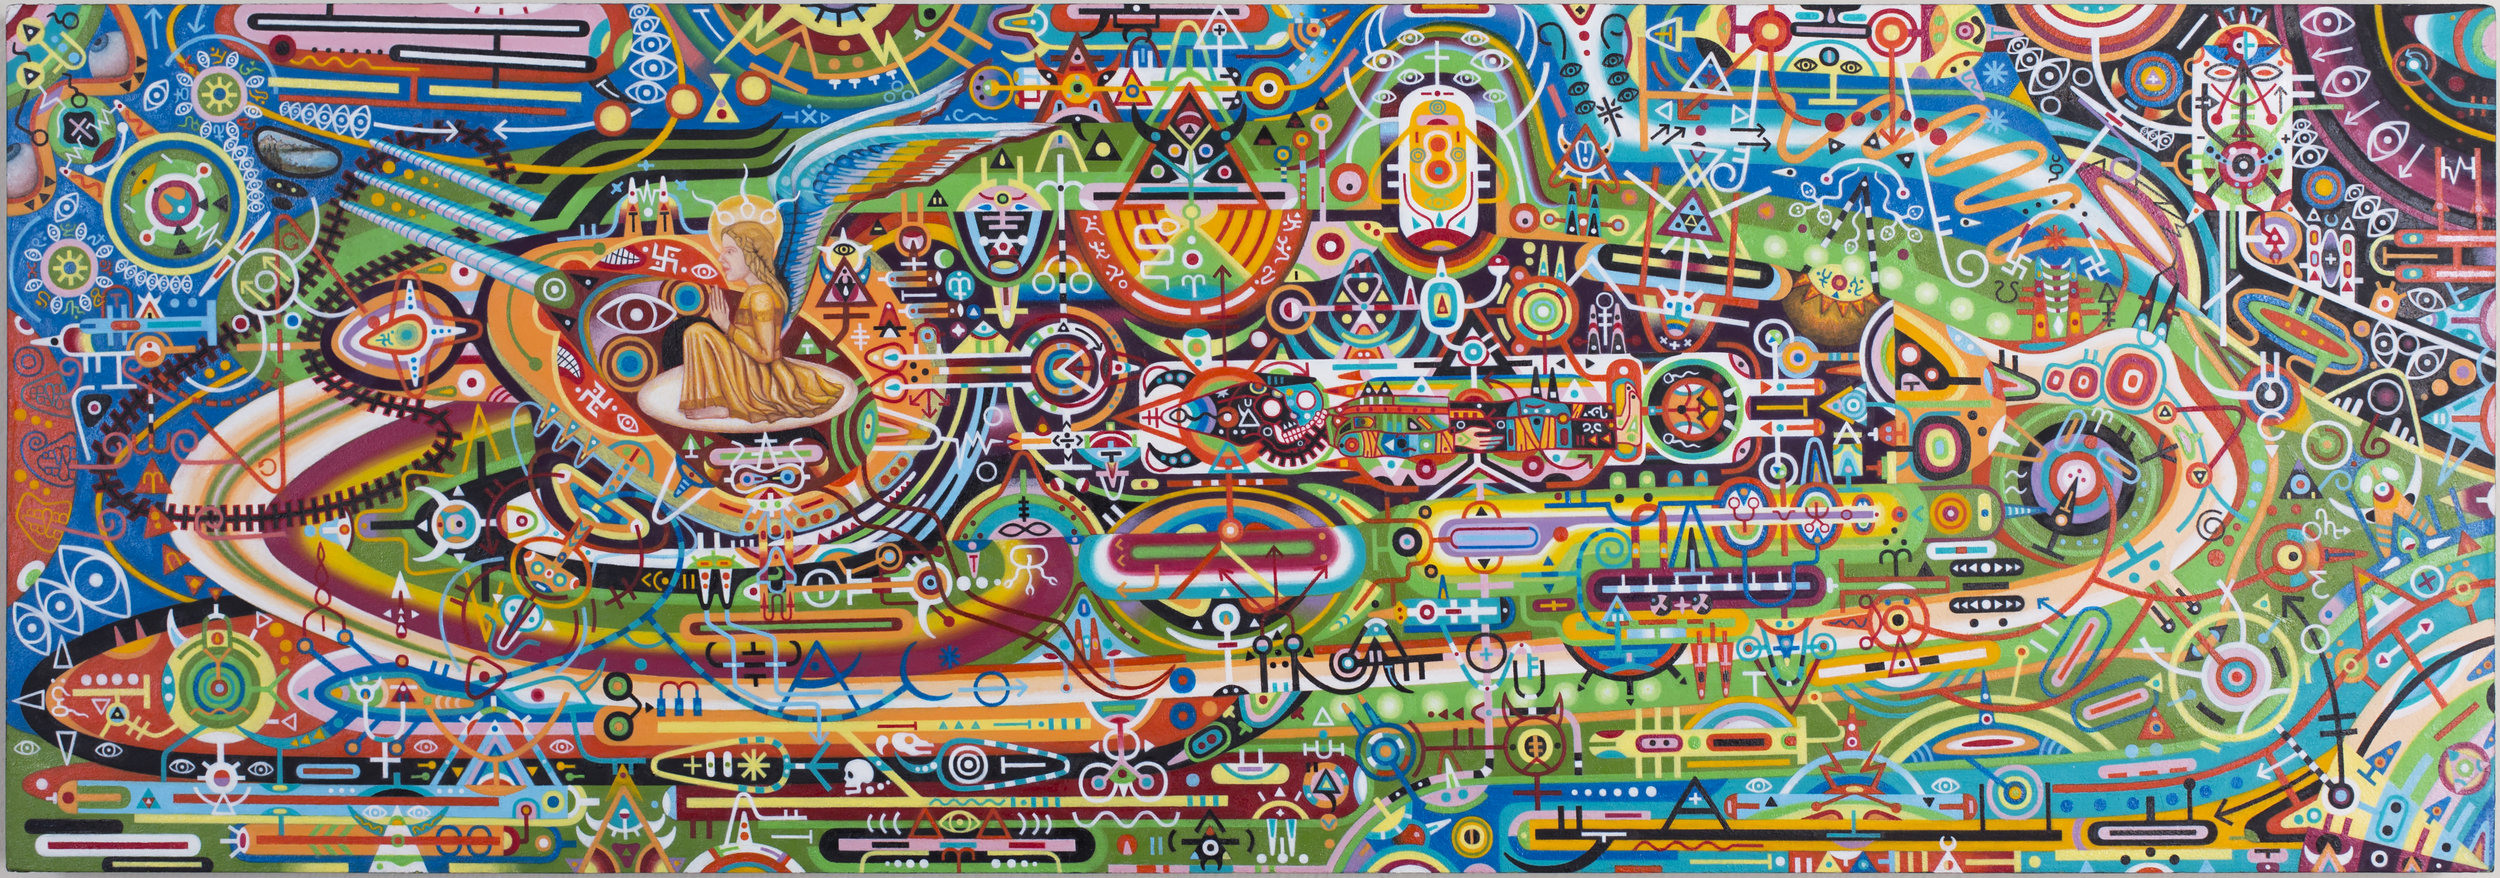  Shawn Thornton,  Brahmastra For a New Age (UFO/Time Machine) , 2010-2013, 9” x 27”, Oil on panel. 